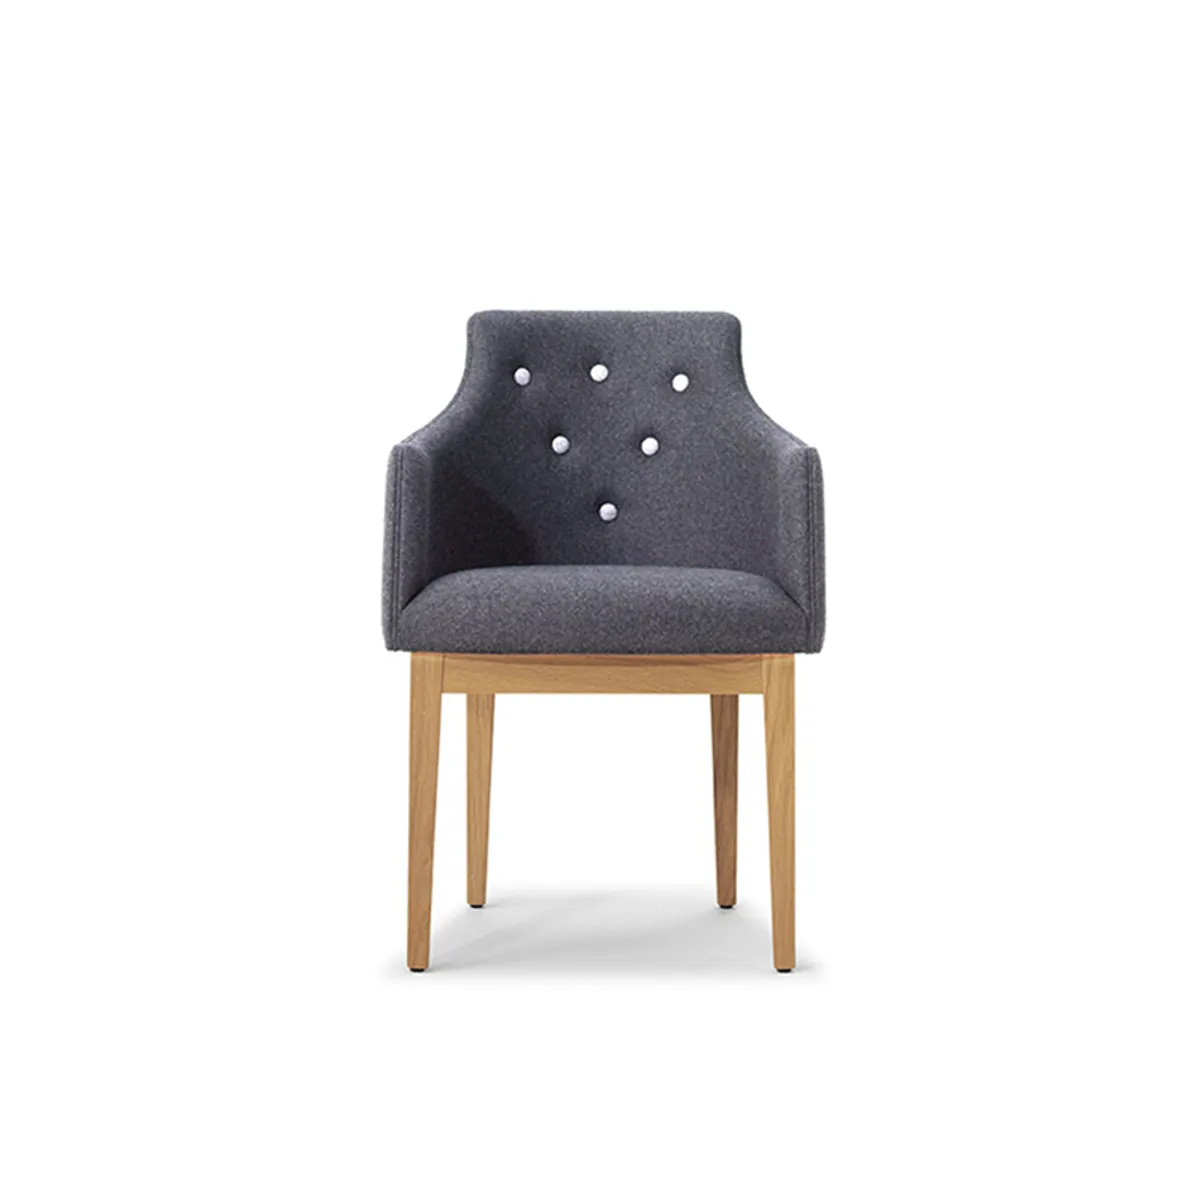 Albert-deluxe-armchair-quirky-button-back-upholstered-armchair